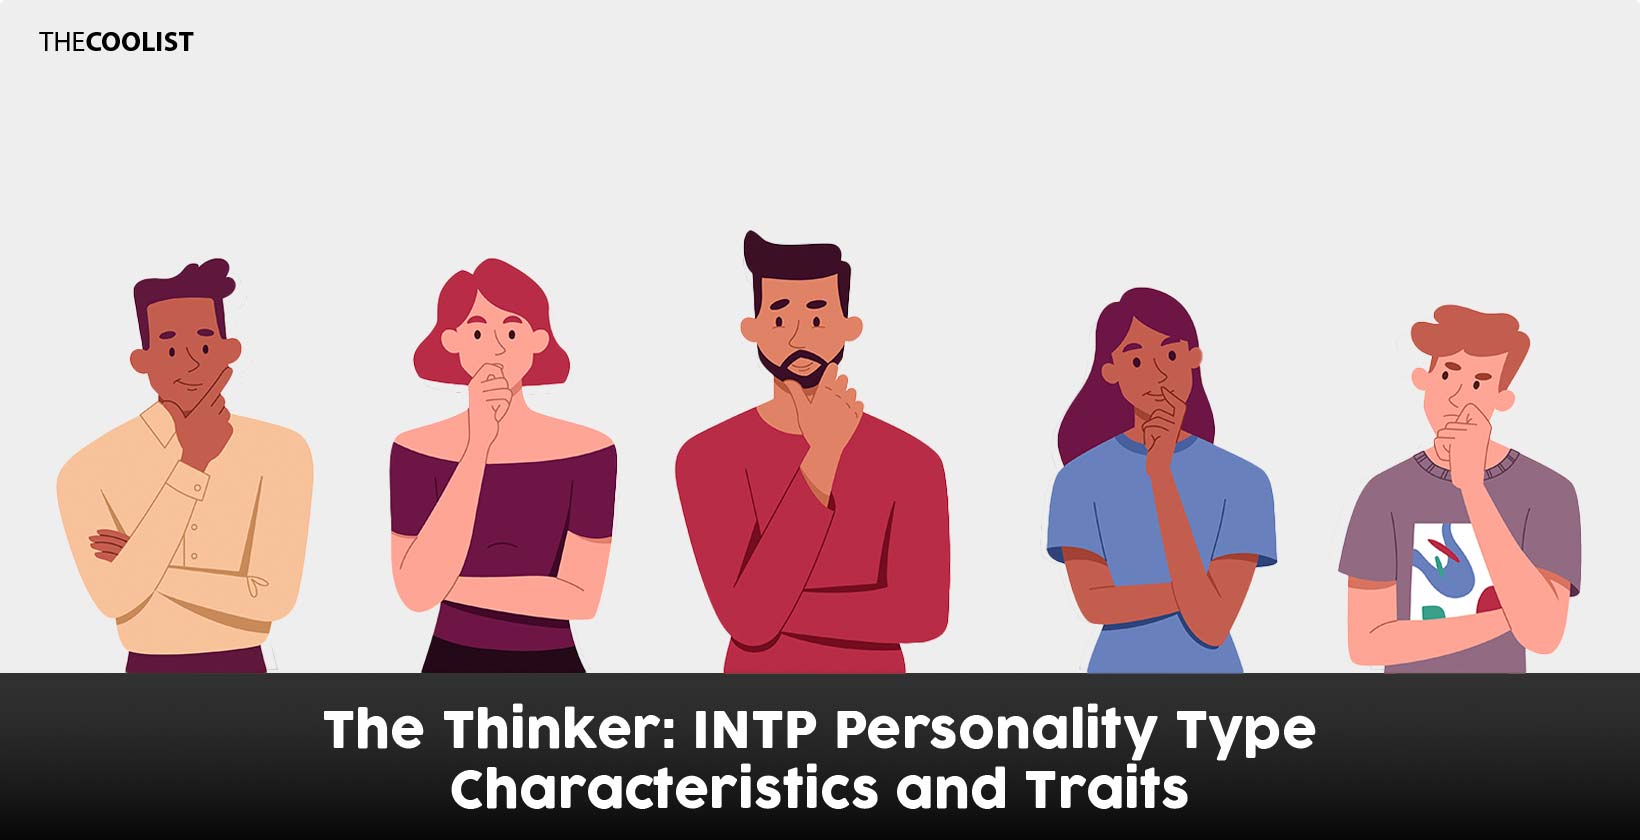 INTP personality type